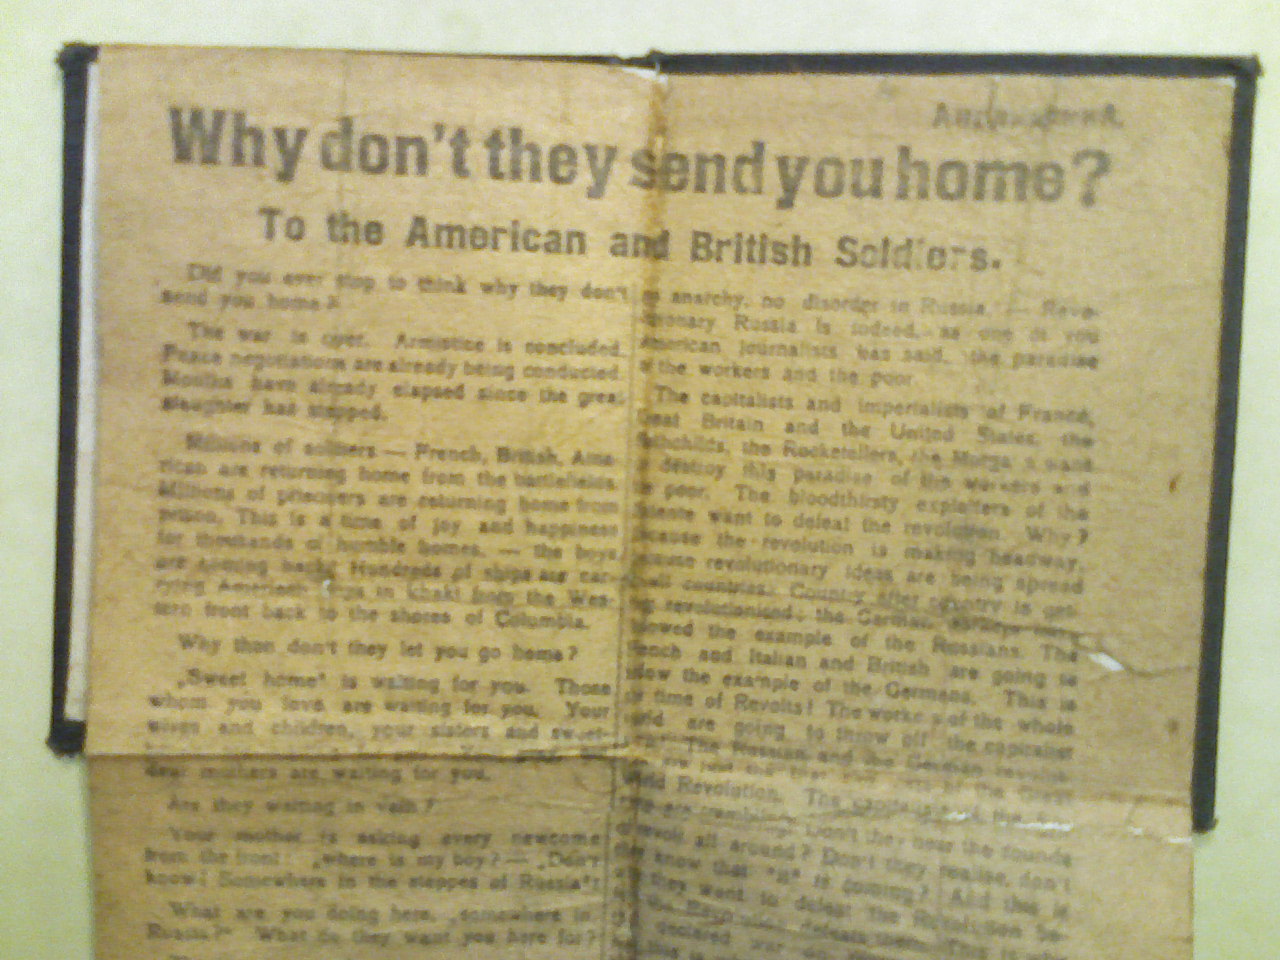 Leaflet from The Group of English speaking Communists, page 2